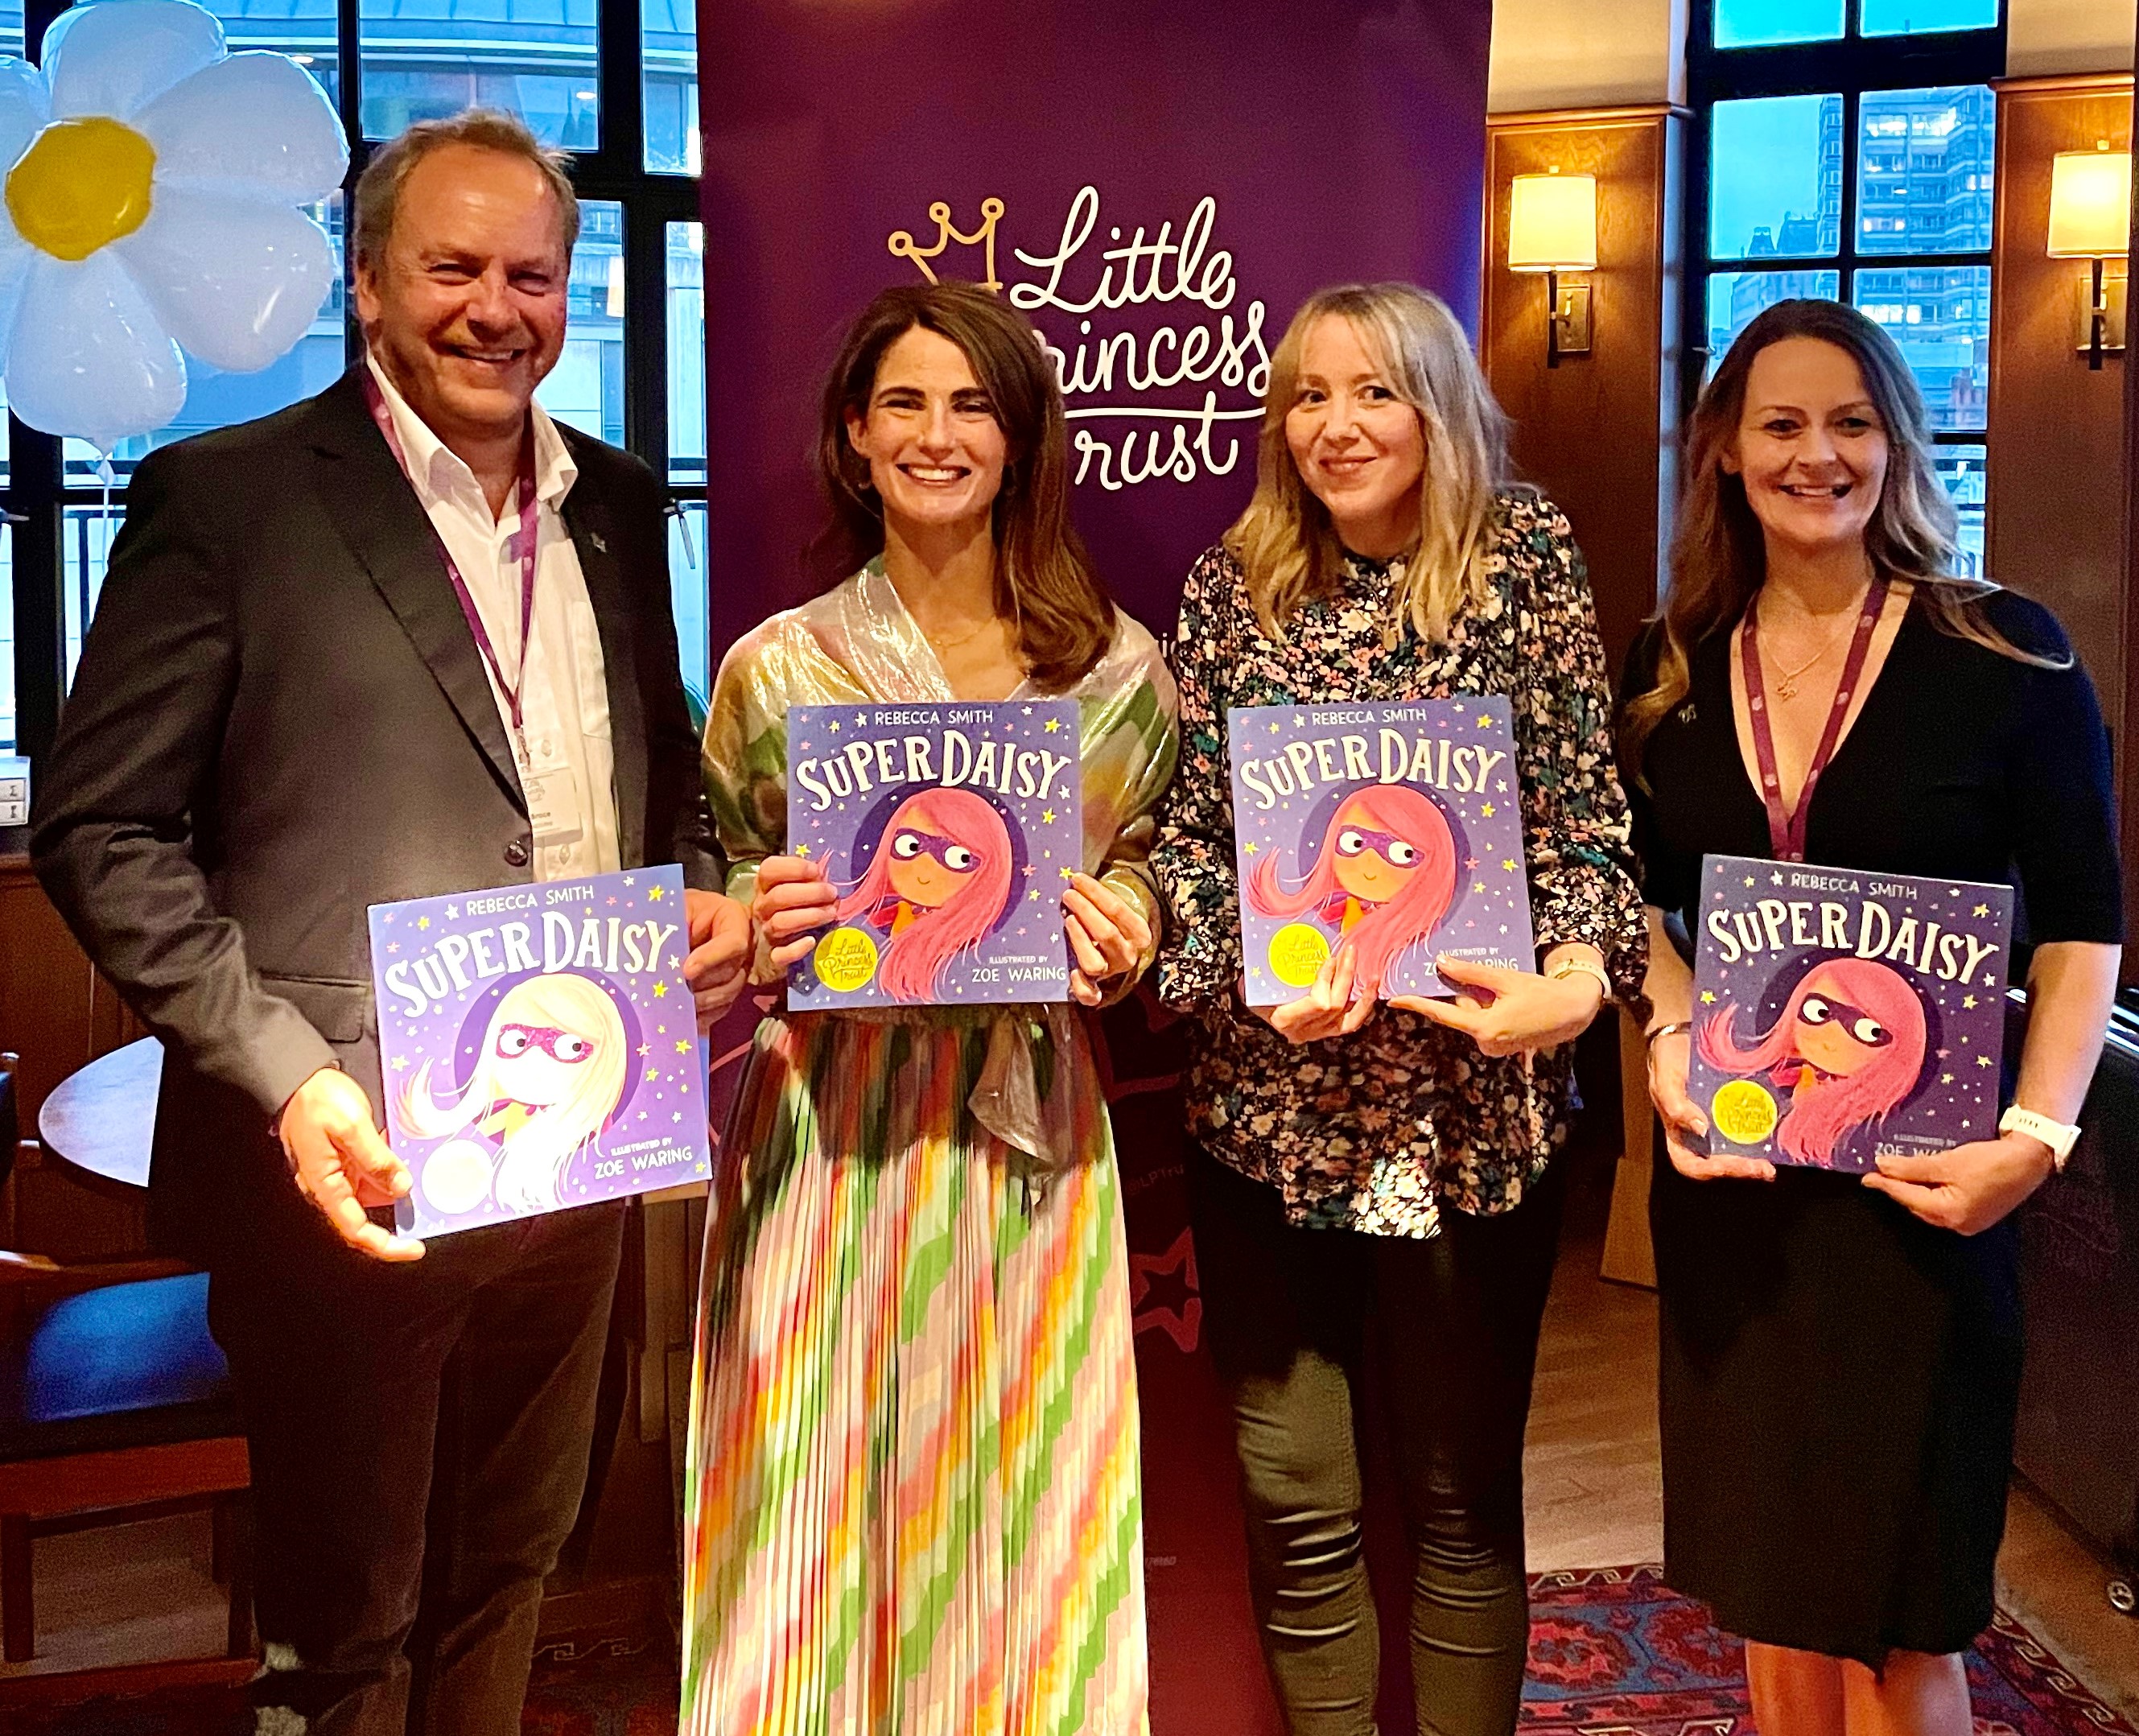 Phil Brace and Wendy Tarplee-Morris (right), from LPT, with author Rebecca Smith (second left) and illustrator Zoe Waring at the official launch of SuperDaisy.